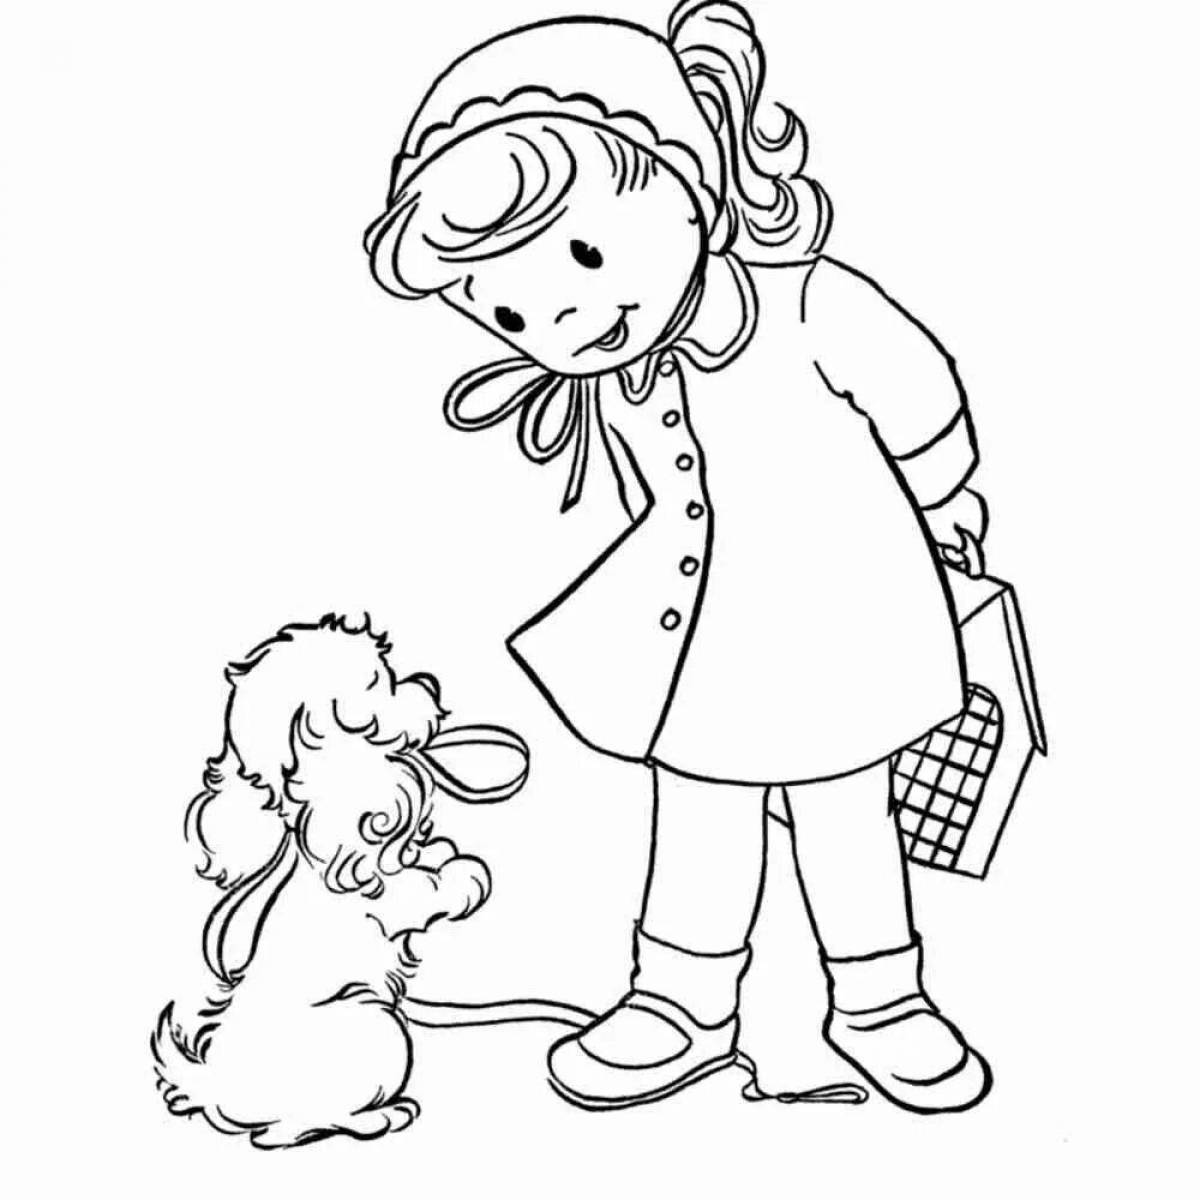 Shine coloring girl with a dog